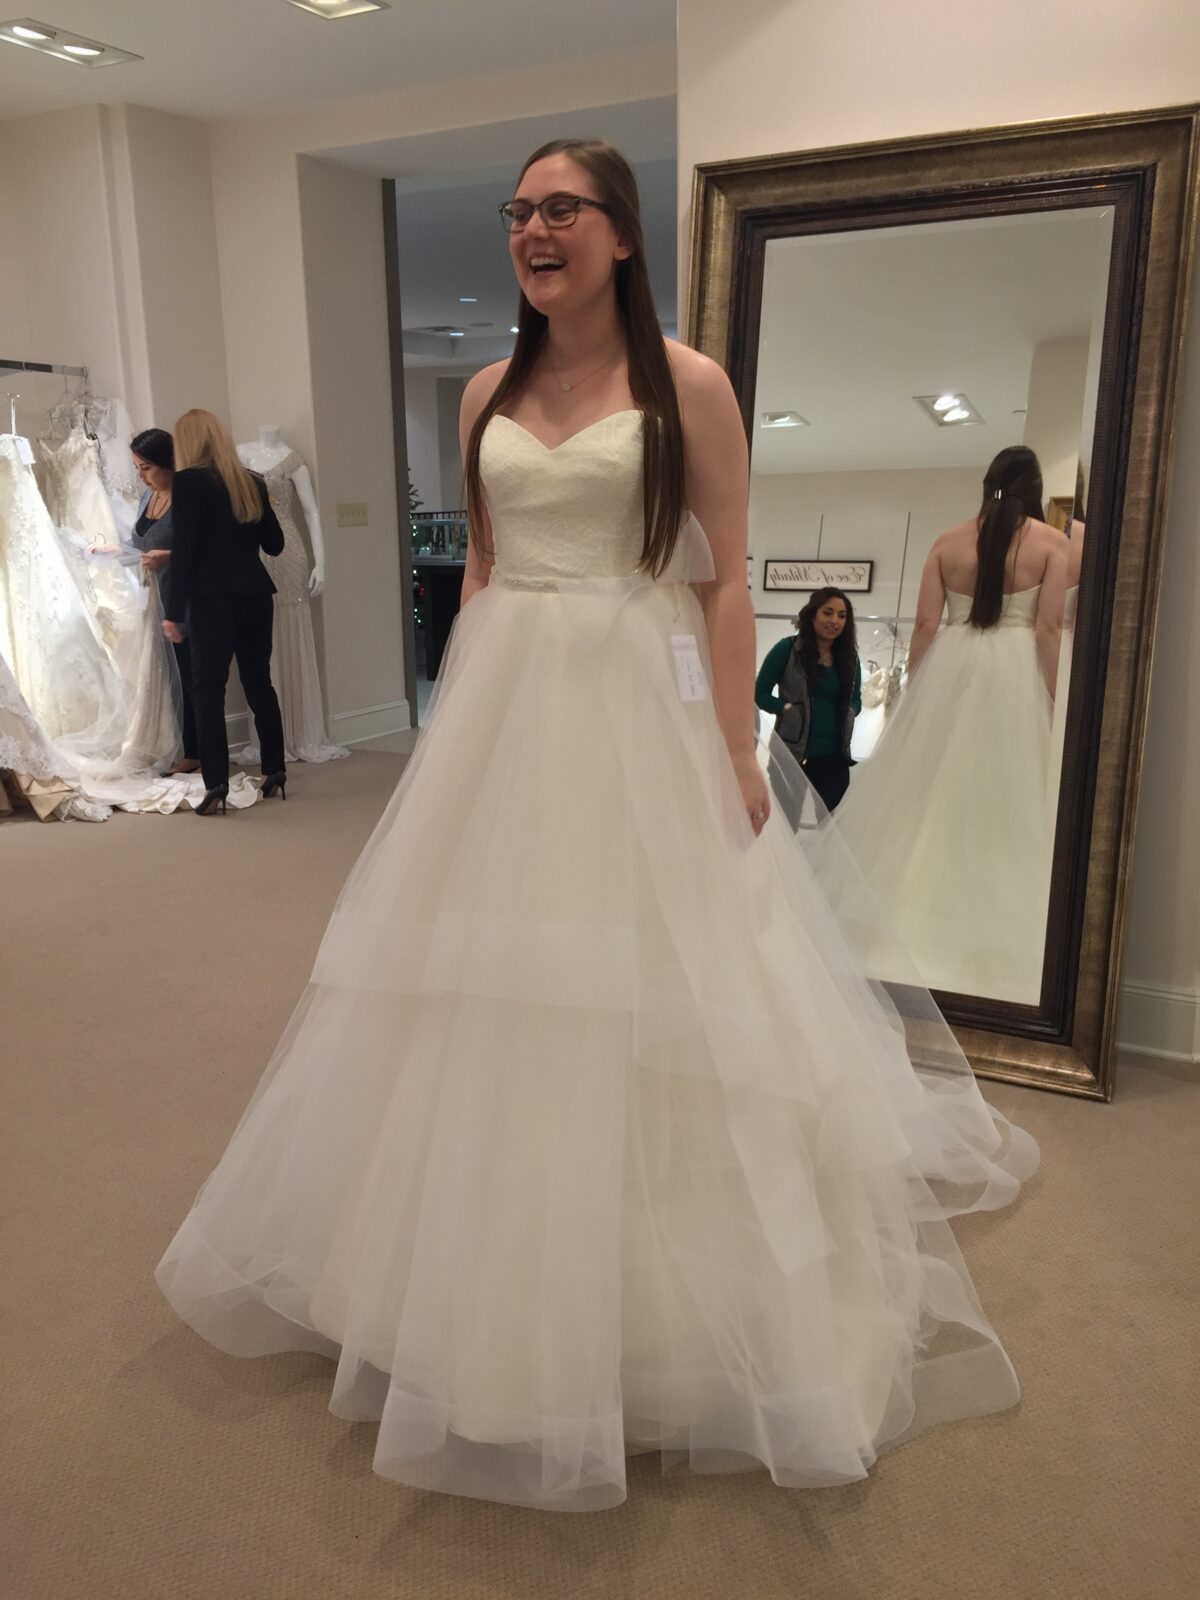 Saying yes to the dress